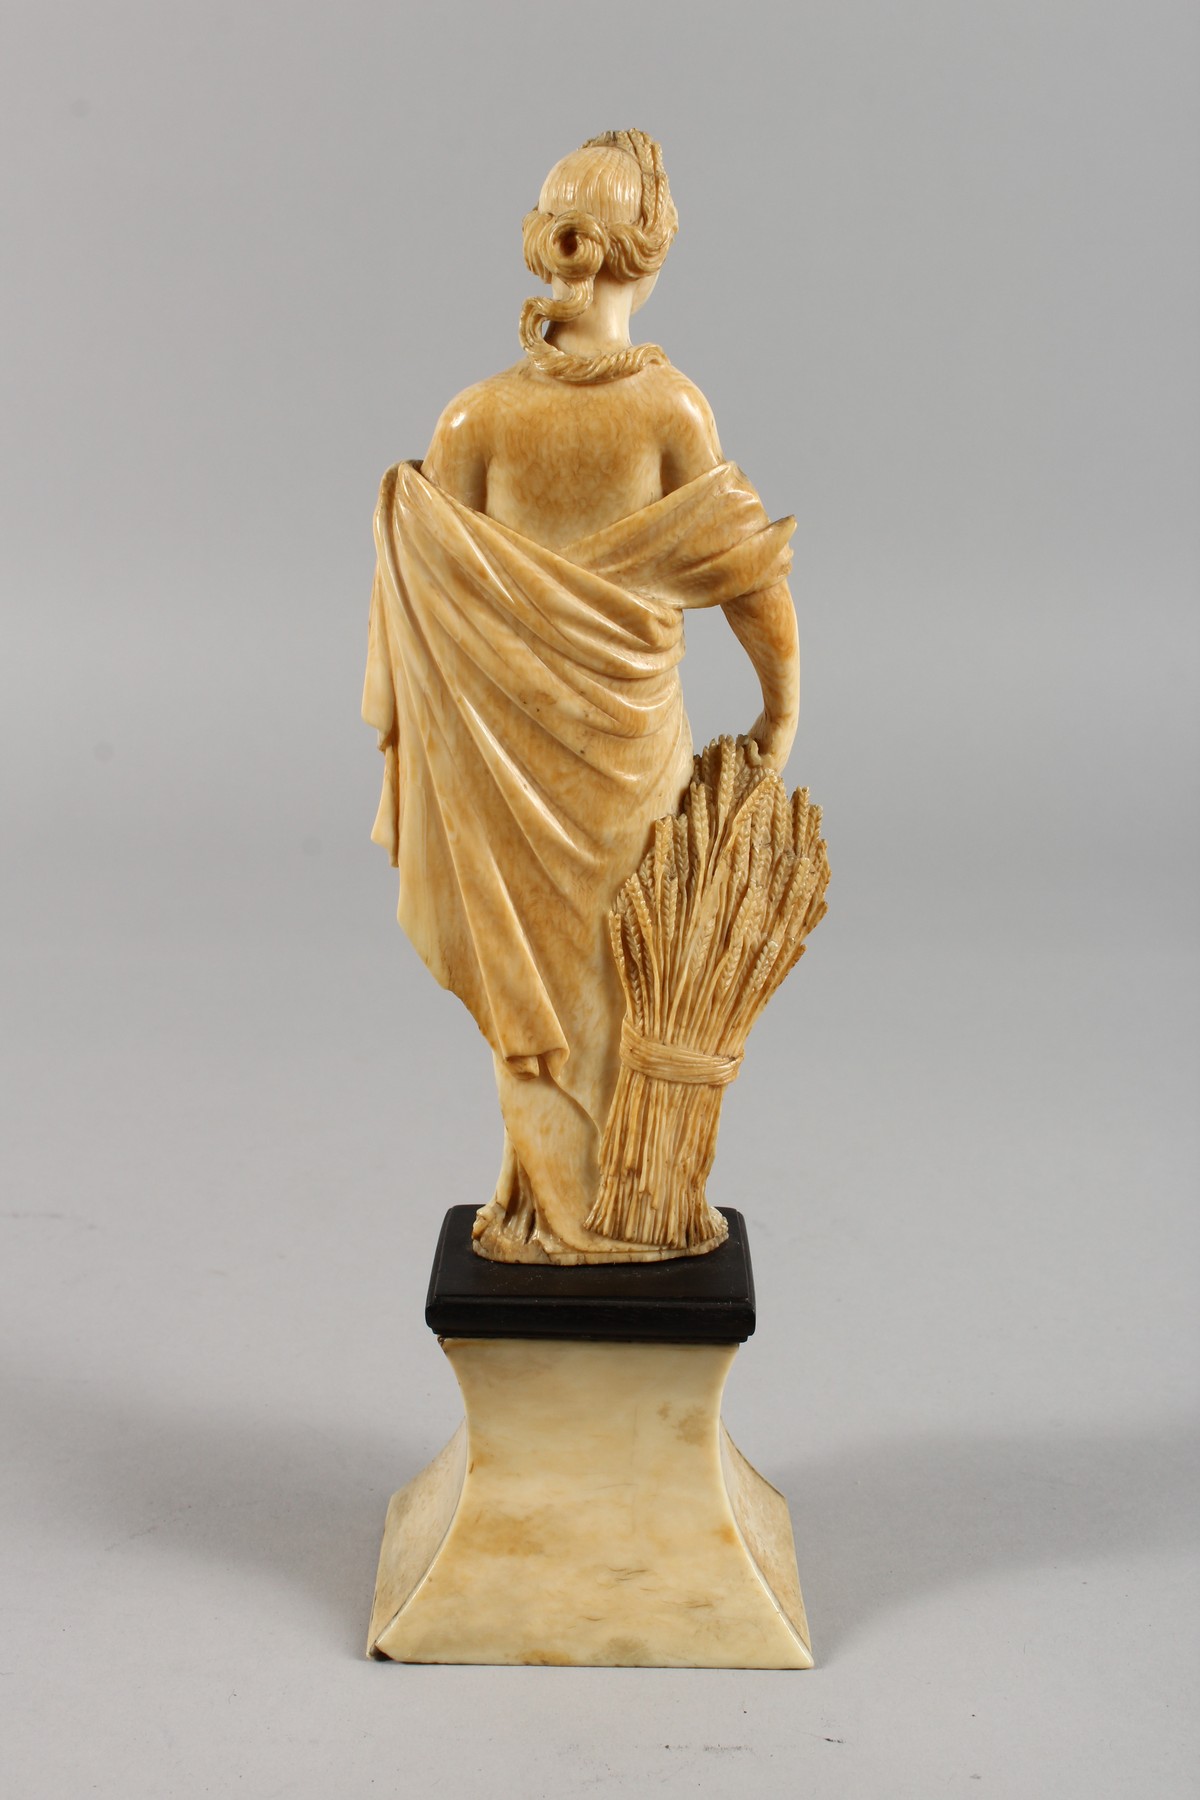 AN 18TH CENTURY CARVED IVORY FIGURE OF A YOUNG FEMALE FIGURE depicting AUTUMN, standing on a plinth. - Image 3 of 5